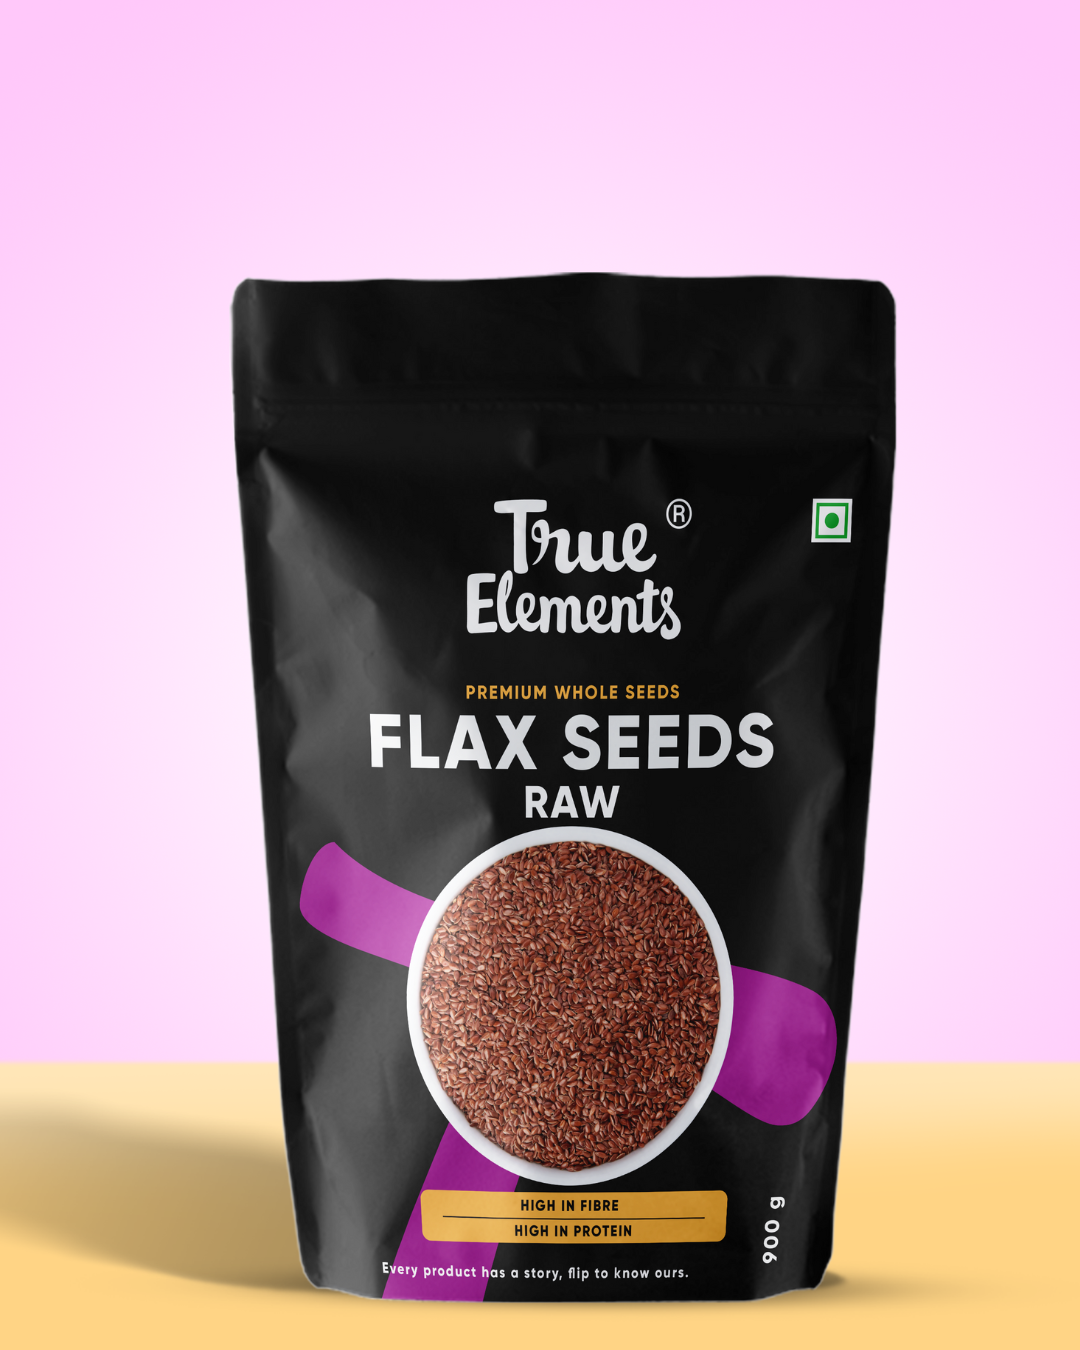 True elements raw flax seeds 900g Pouch (Premium Whole Seeds)